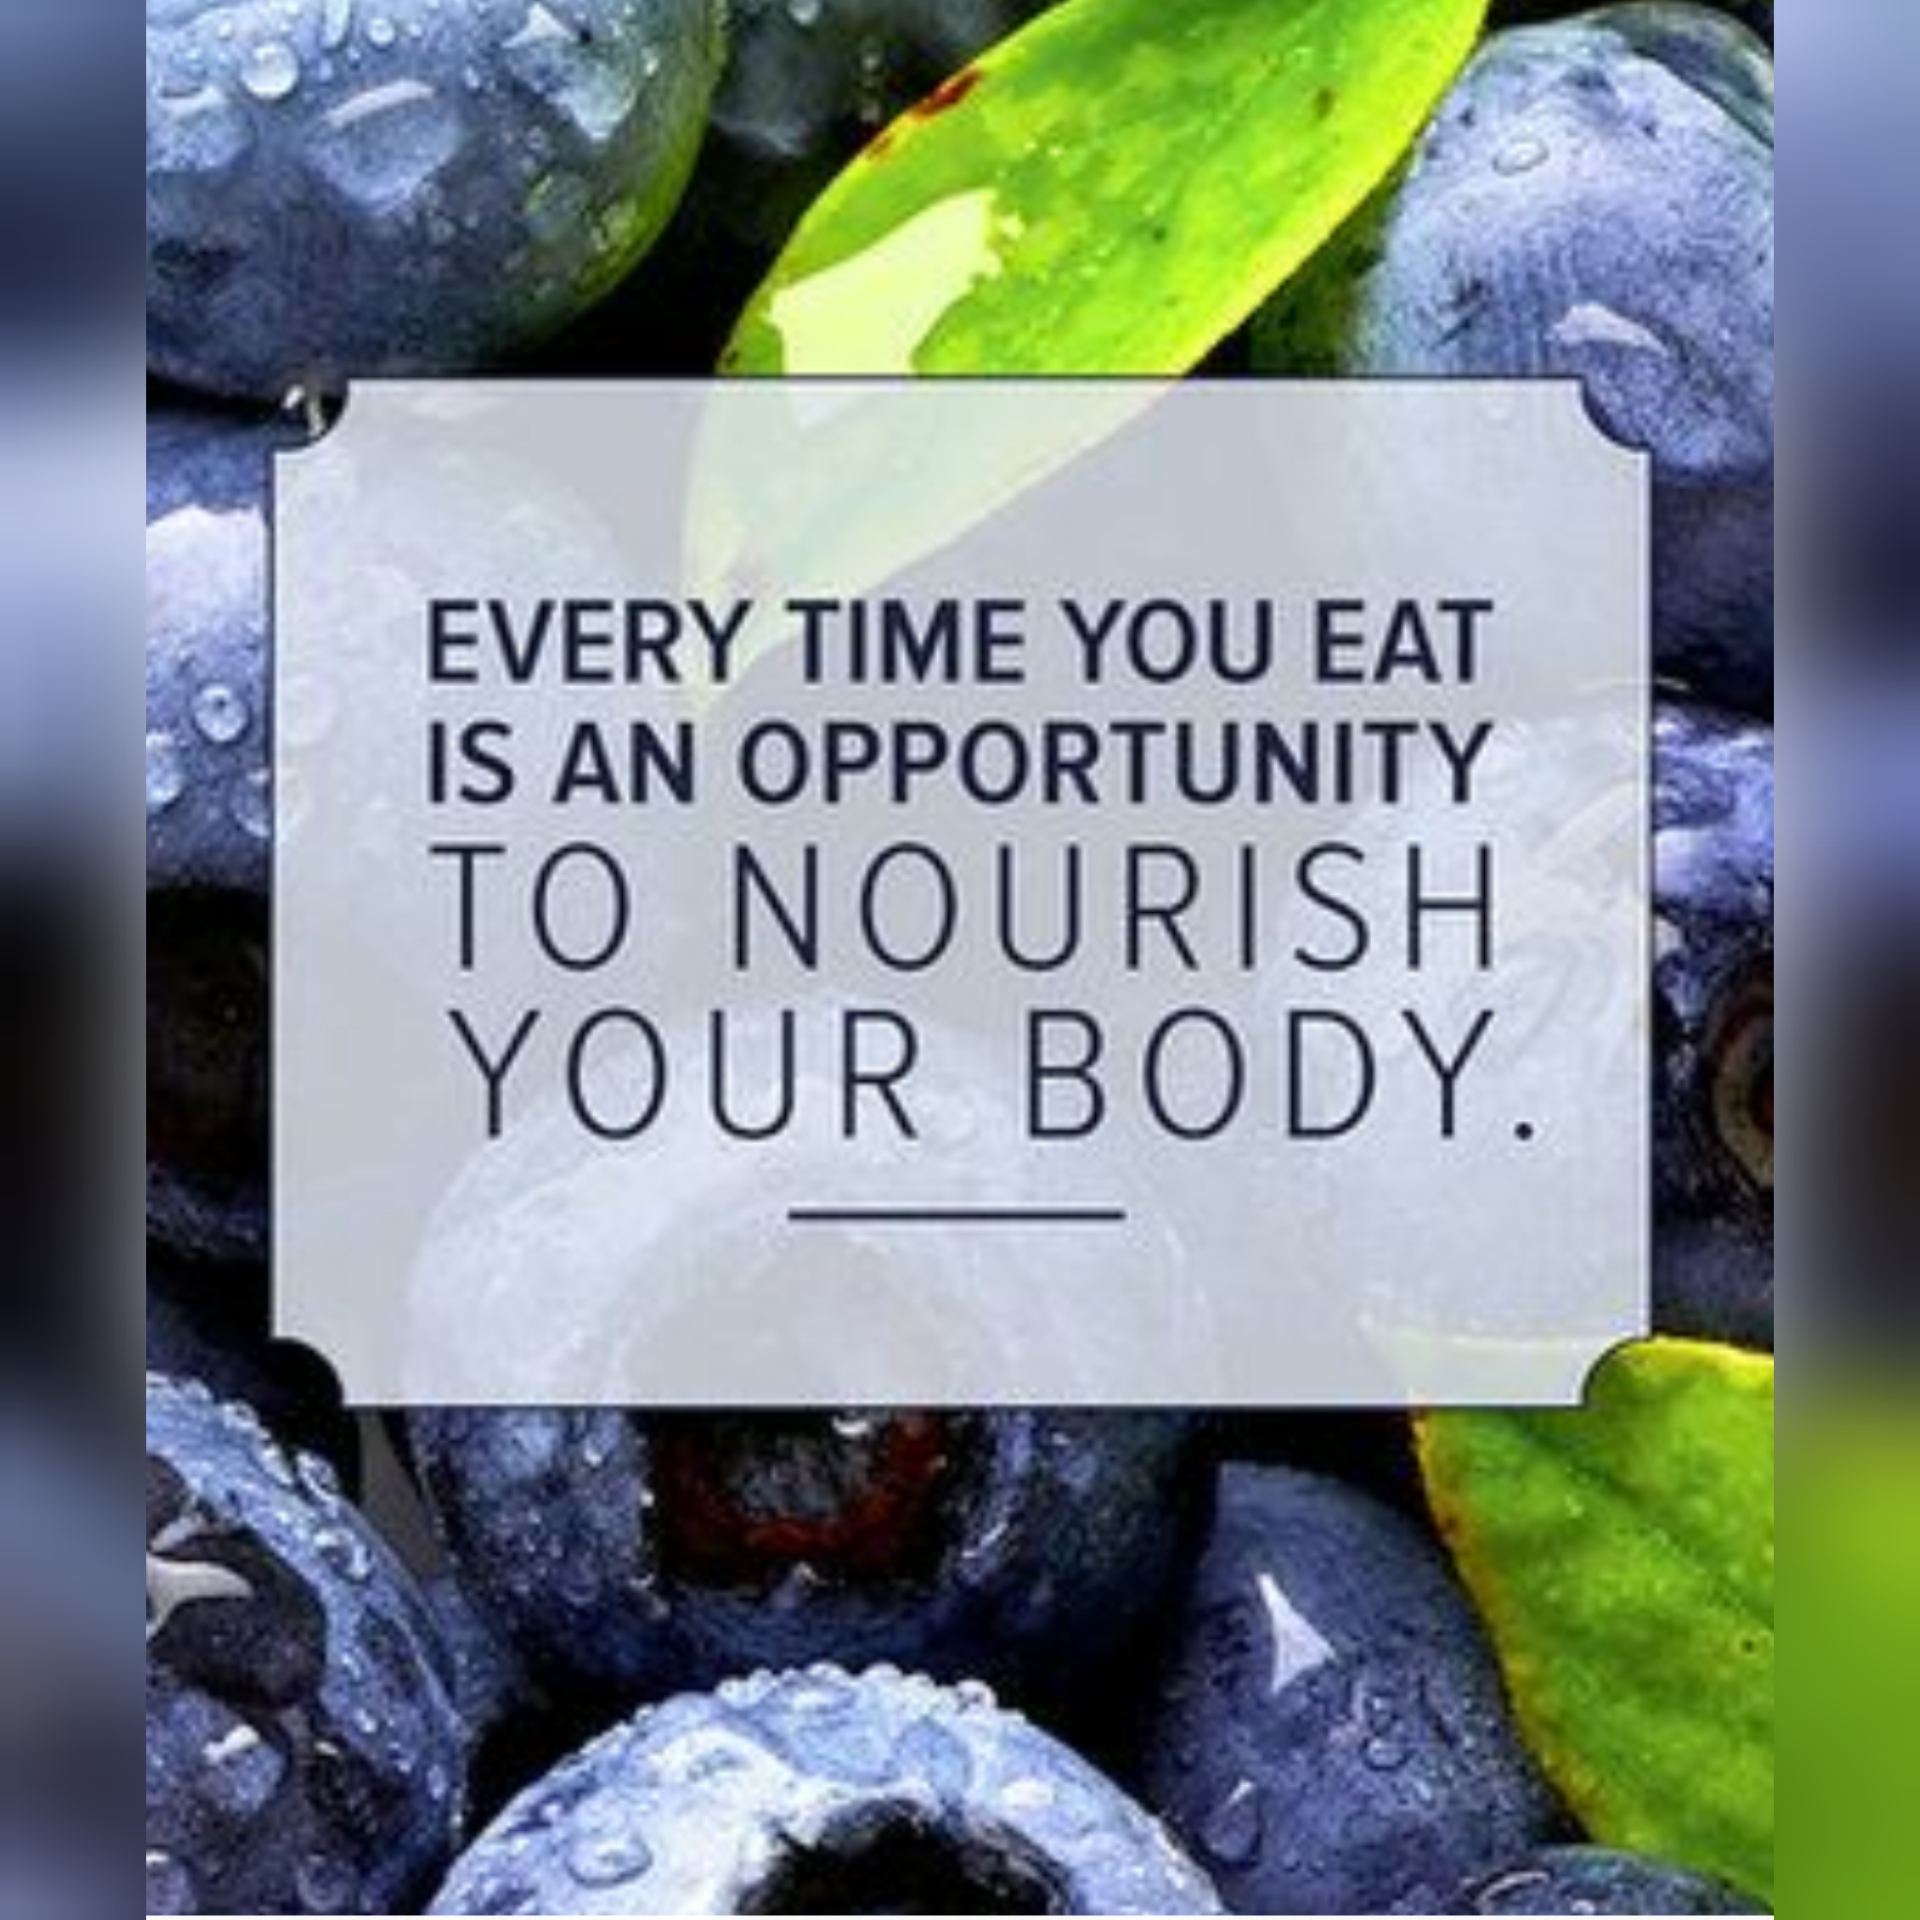 how to motivate yourself to eat healthier